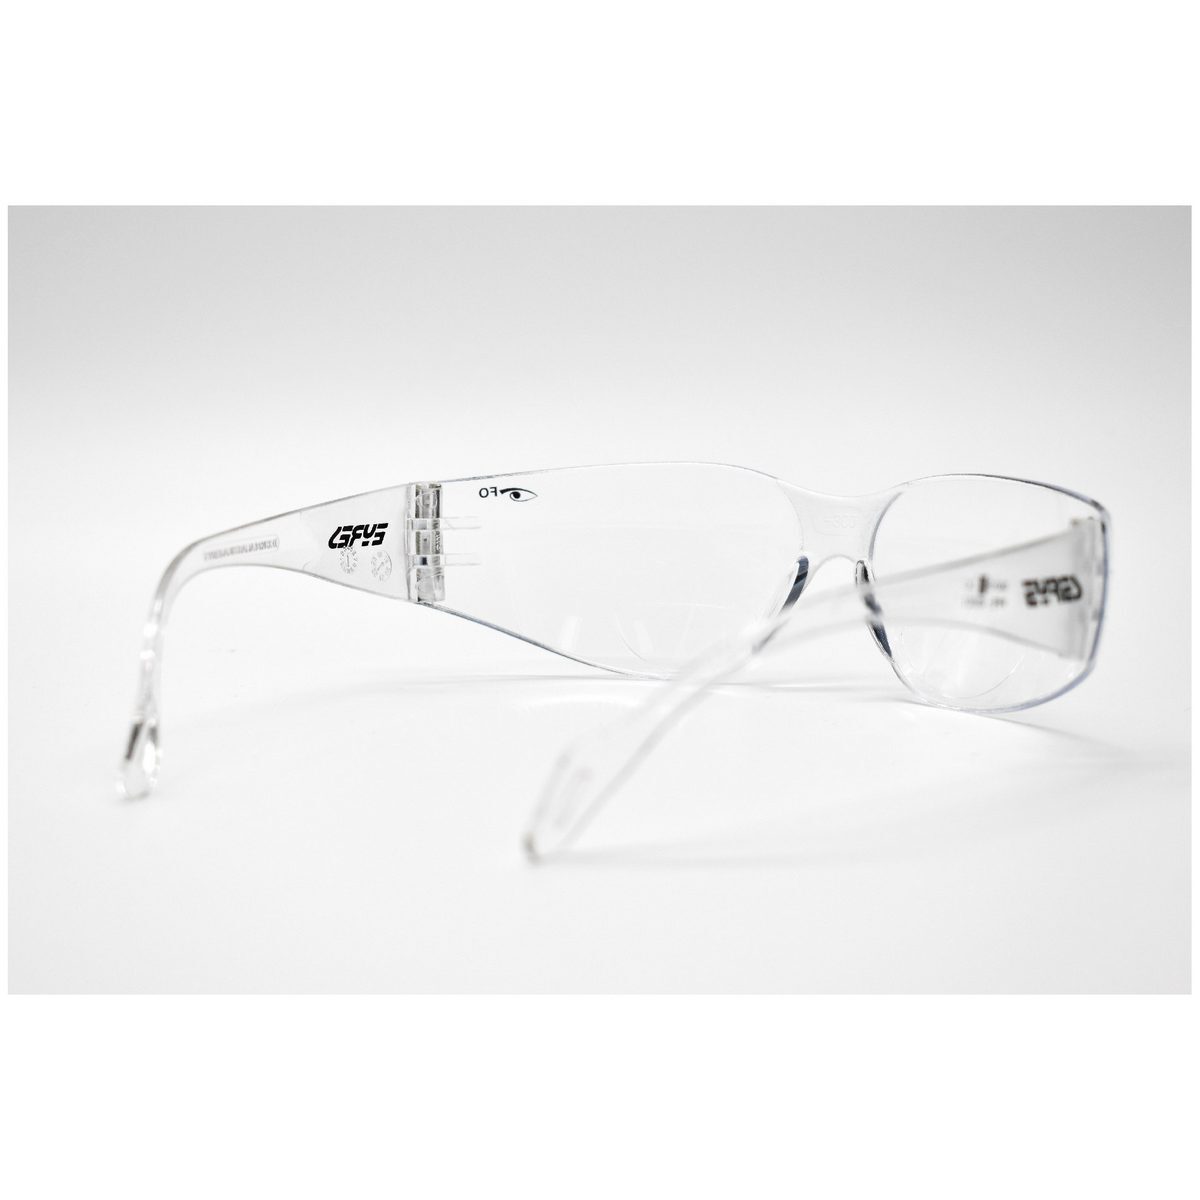 Eyres by Shamir READER Clear Lens + 1.00 Magnification Safety Glasses